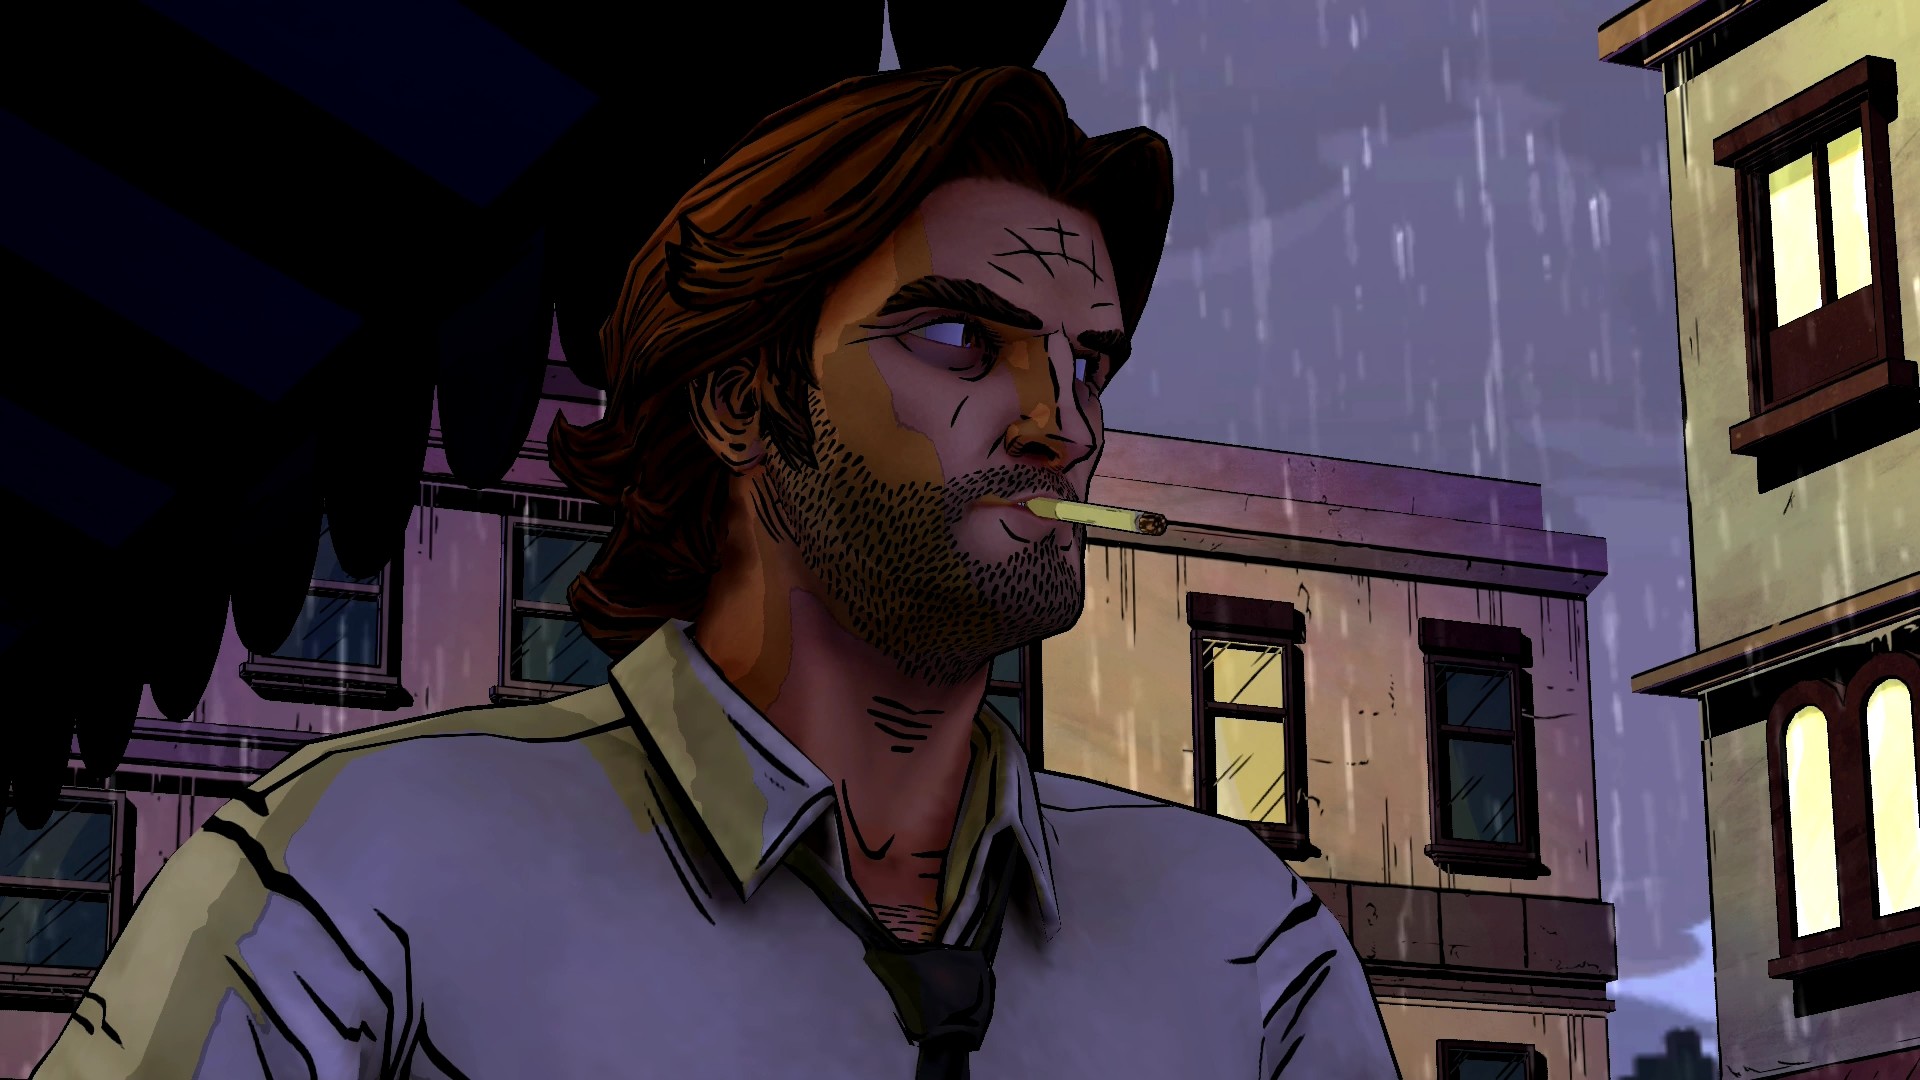 1920x1080 It's a good thing Fables are so hard to kill; Bigby's smoking habit can'